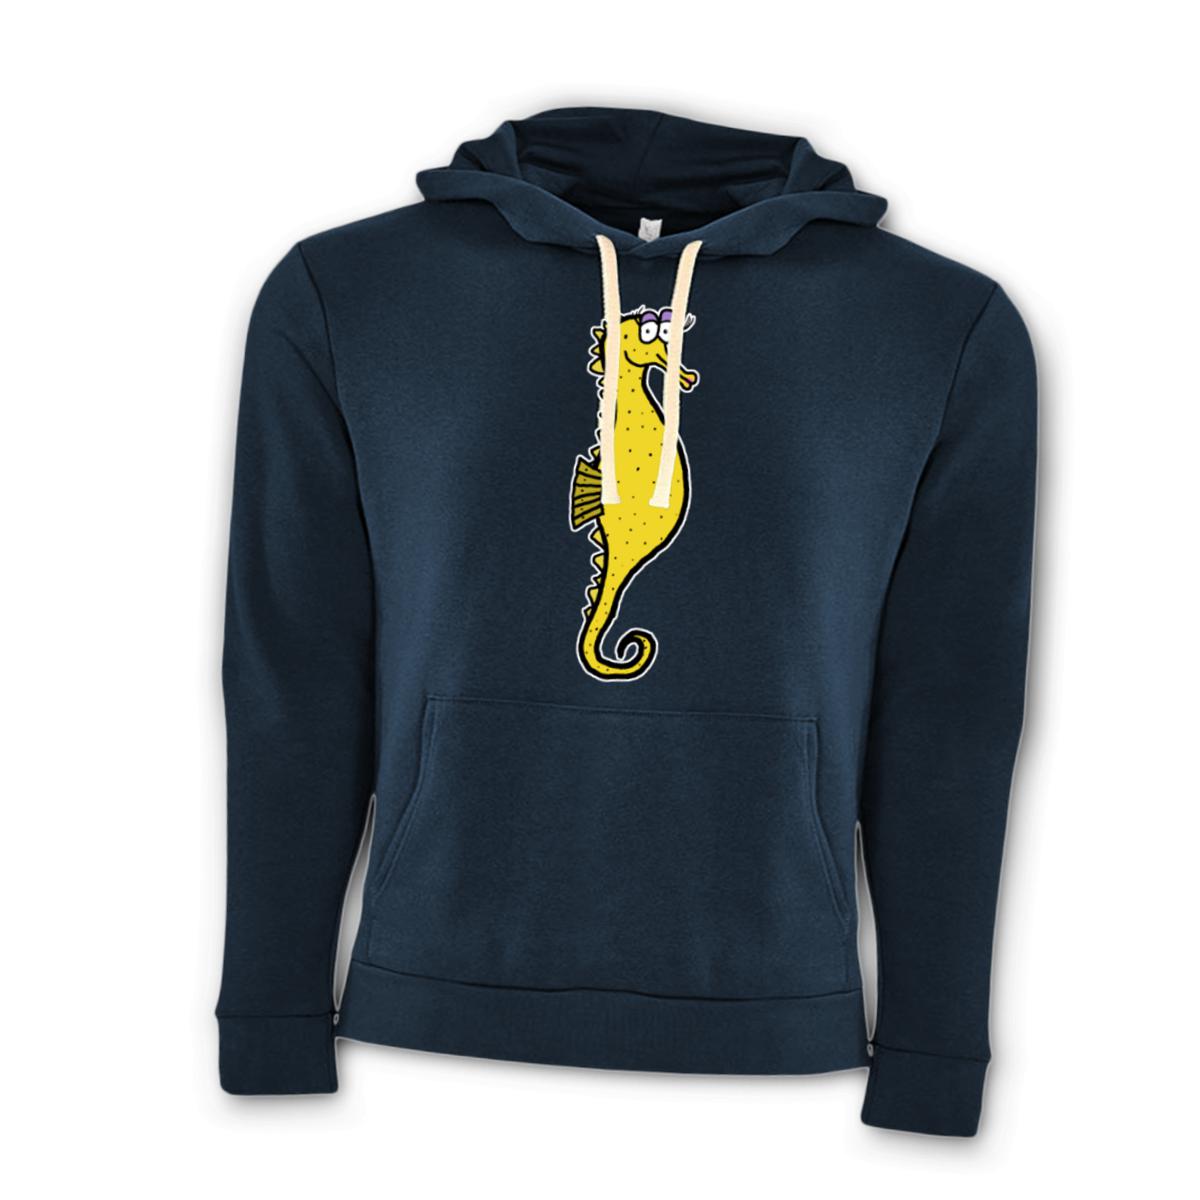 Seahorse Unisex Pullover Hoodie Small midnight-navy